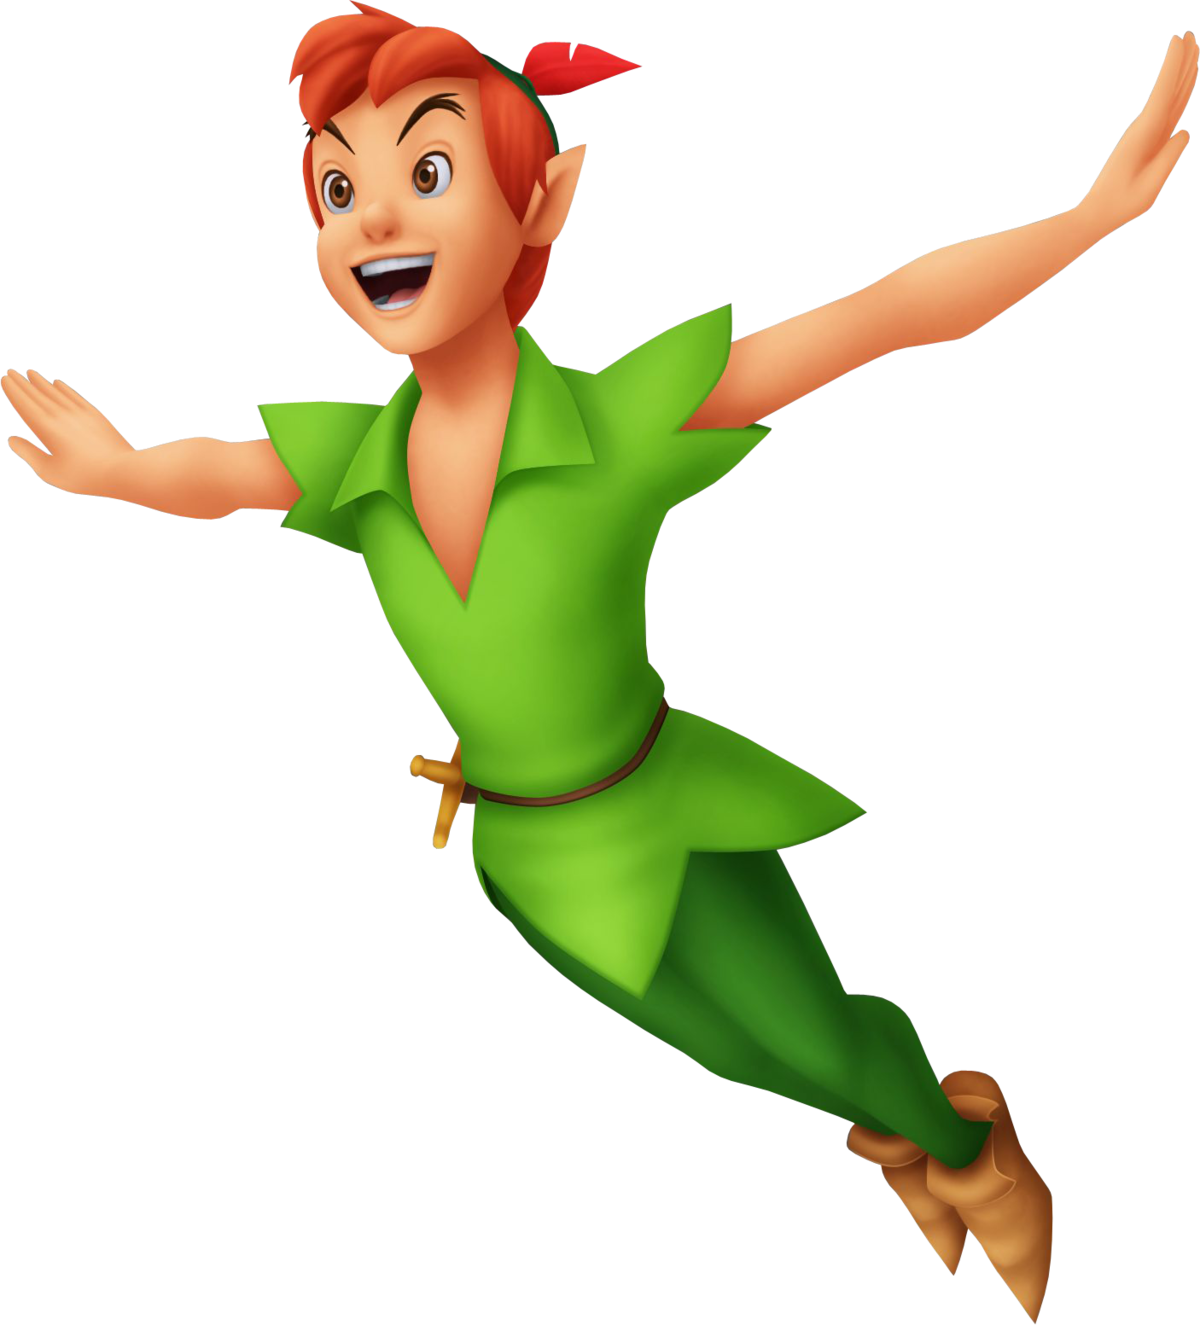 https://kh.wiki.gallery/images/thumb/a/a6/Peter_Pan_KHBBS.png/1200px-Peter_Pan_KHBBS.png